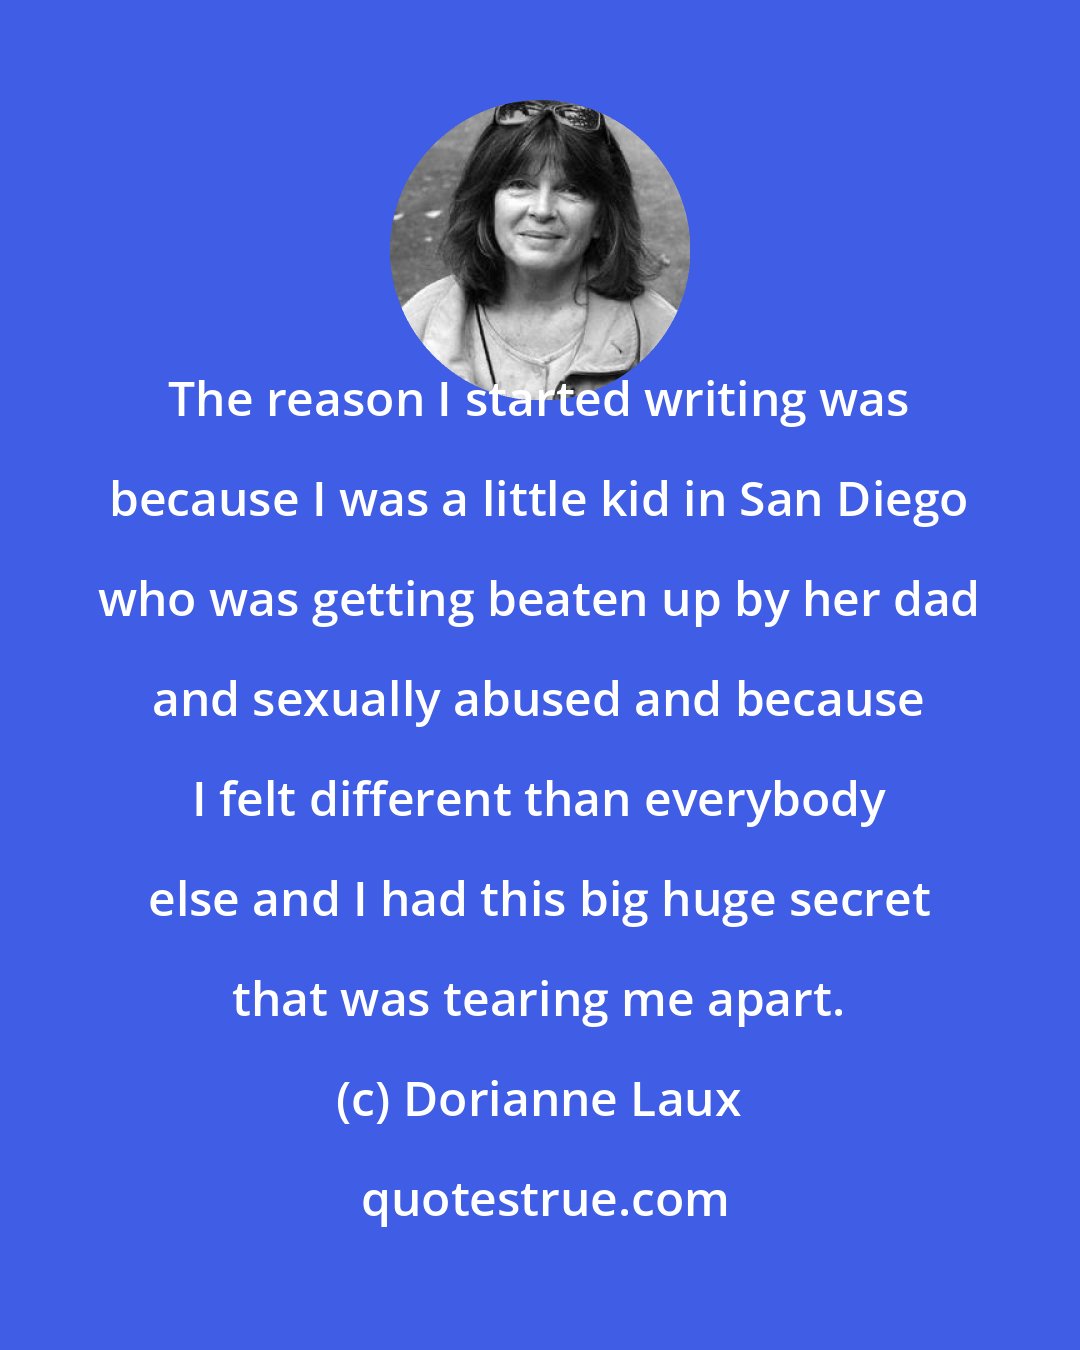 Dorianne Laux: The reason I started writing was because I was a little kid in San Diego who was getting beaten up by her dad and sexually abused and because I felt different than everybody else and I had this big huge secret that was tearing me apart.